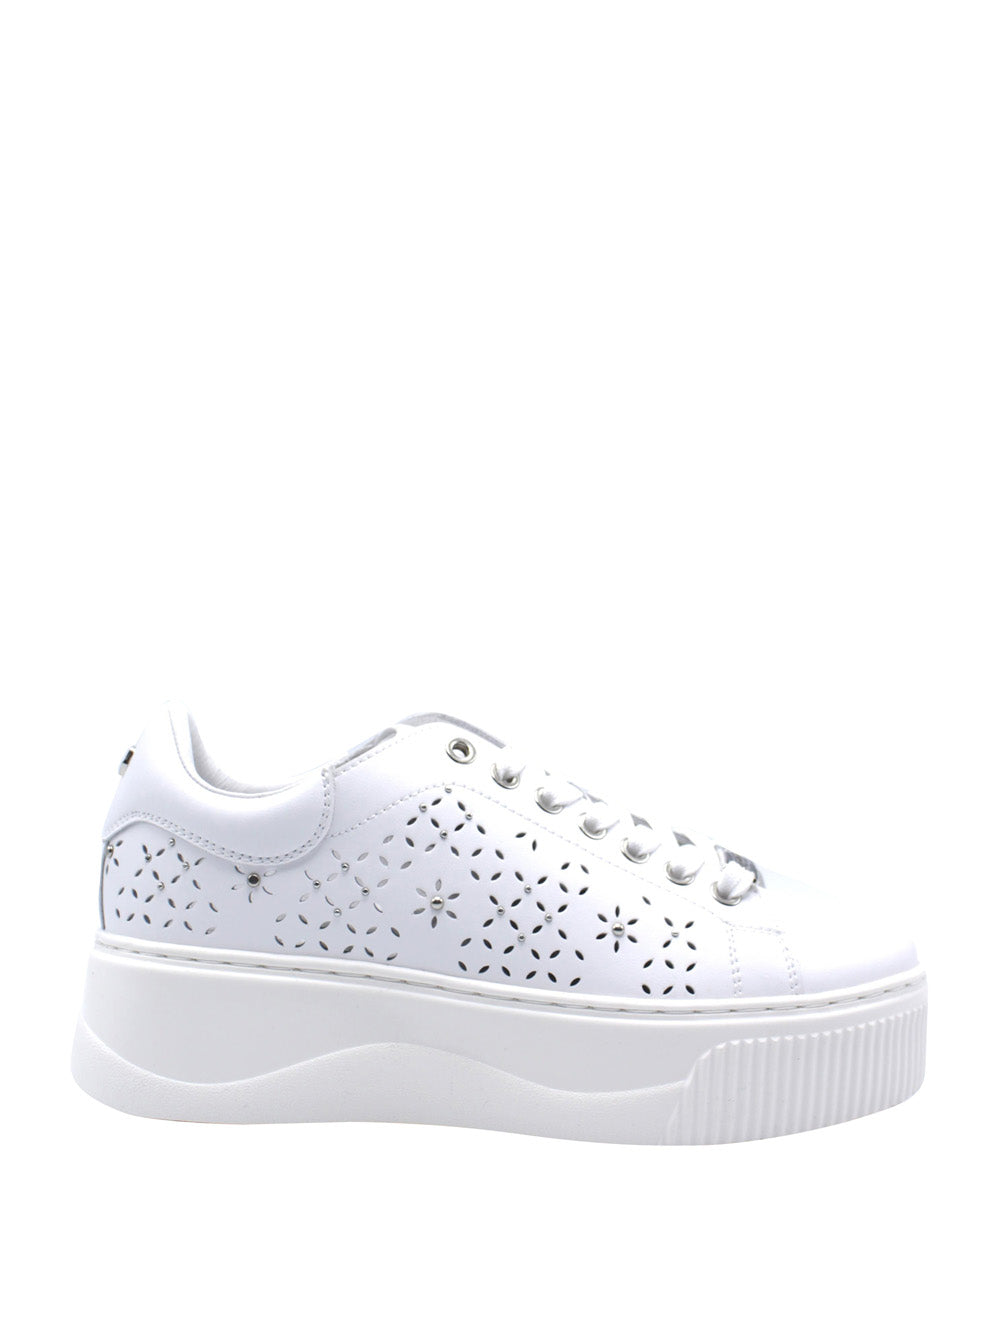 CULT Sneakers platform Donna - Bianco modello CLW337102